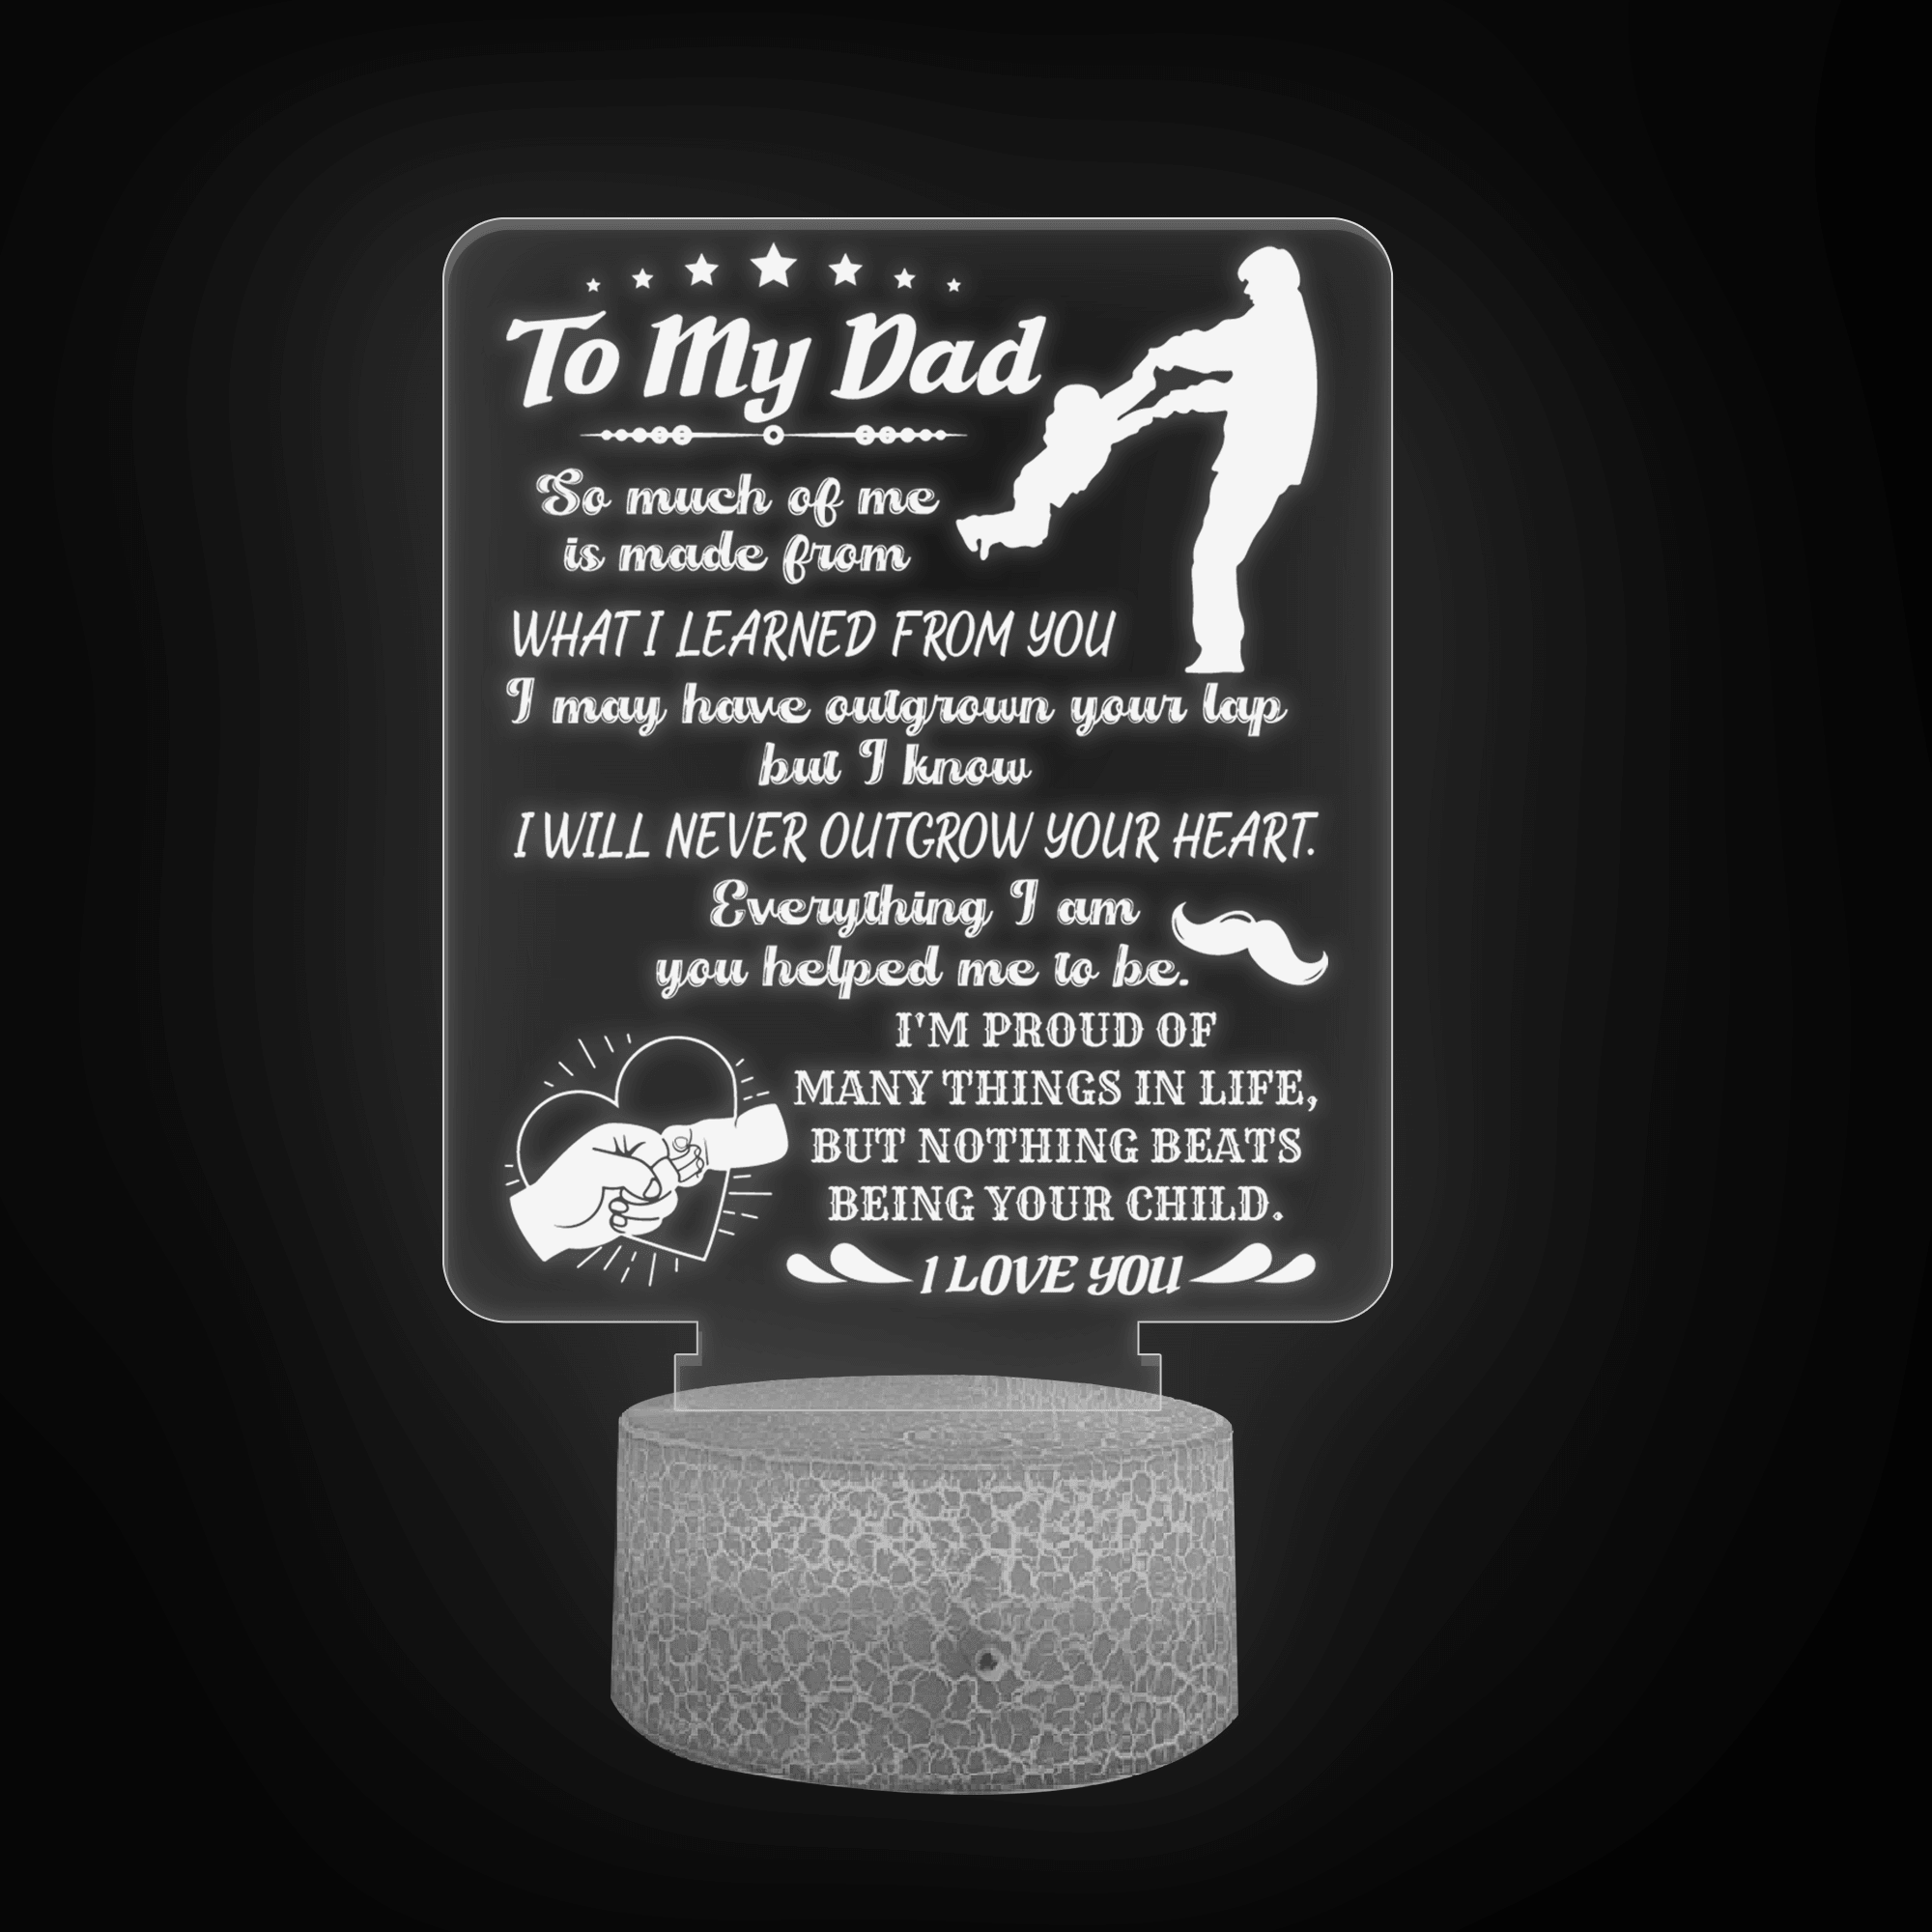 3D Led Light - Family - To My Dad - Everything I Am You Helped Me To Be - Auglca18019 - Gifts Holder